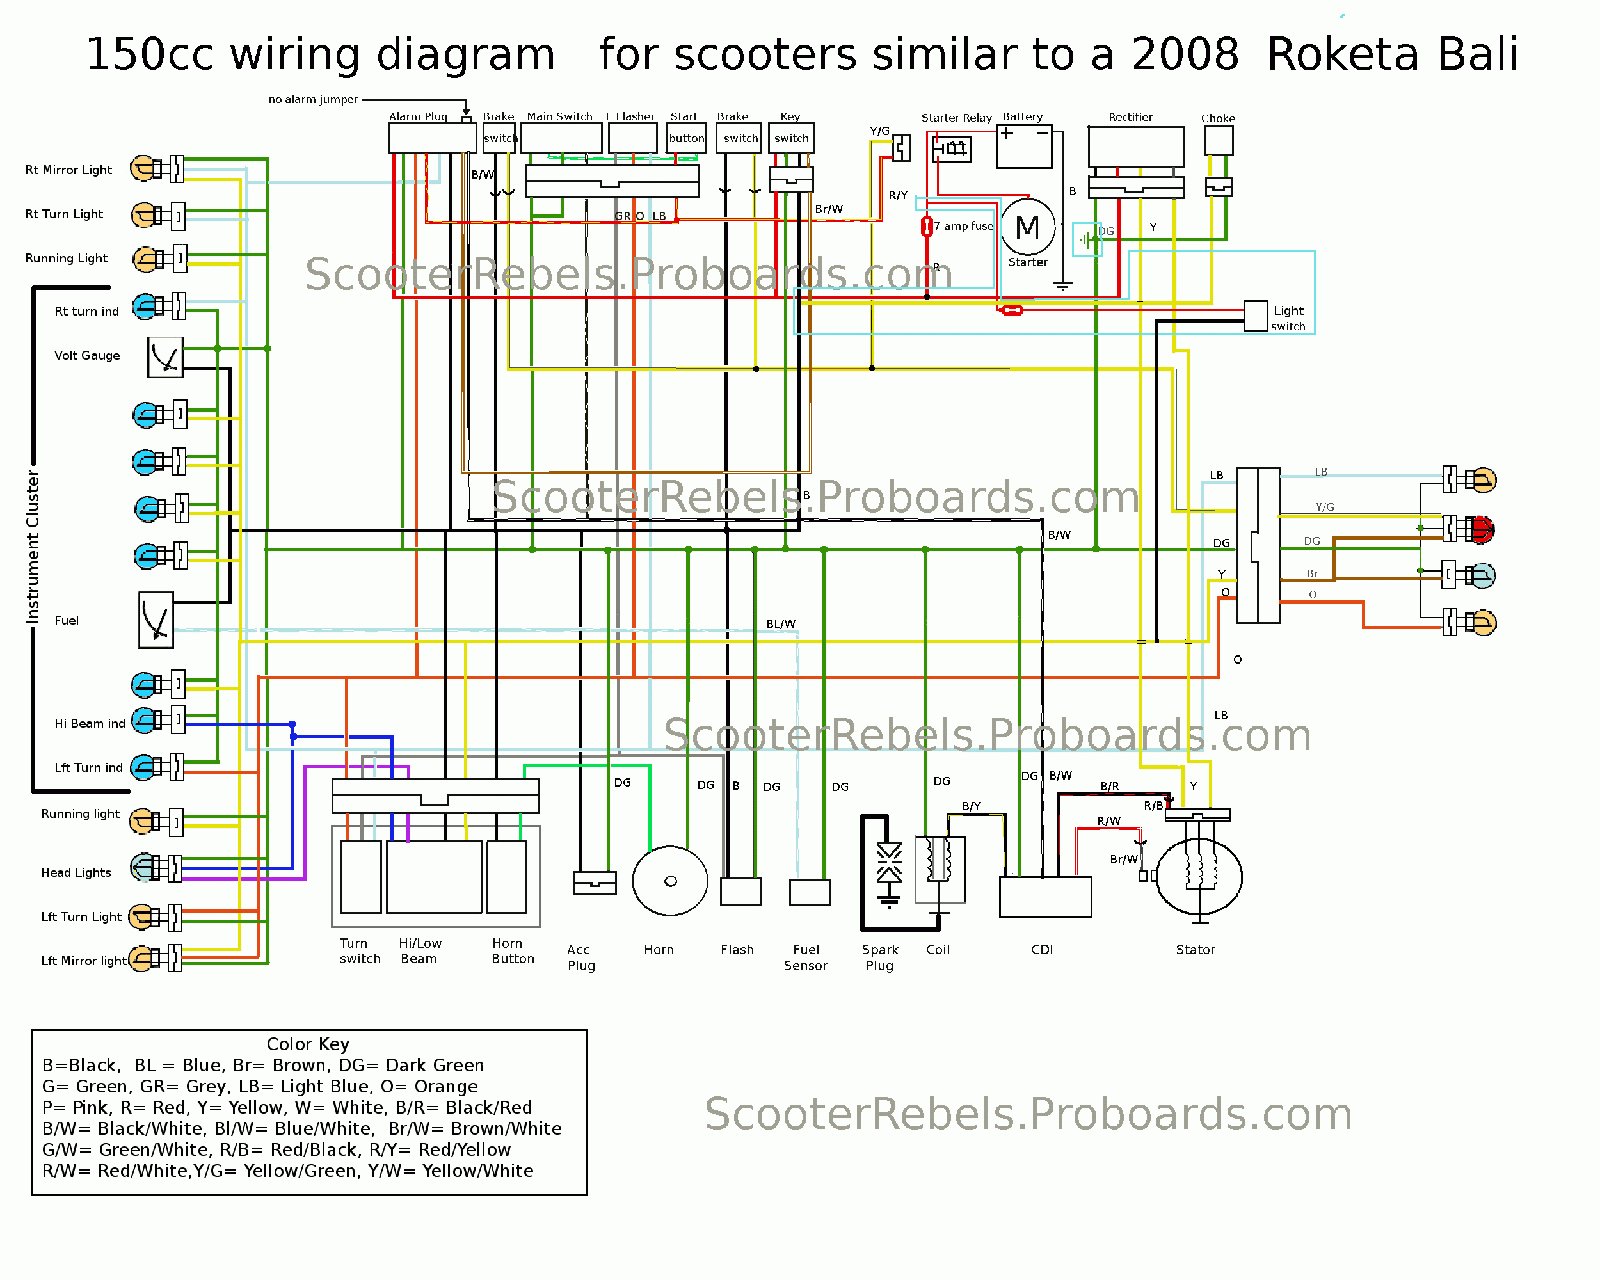 Wiring Diagram For 150Cc Gy6 Scooter - Data Wiring Diagram Today - Gy6 Wiring Diagram